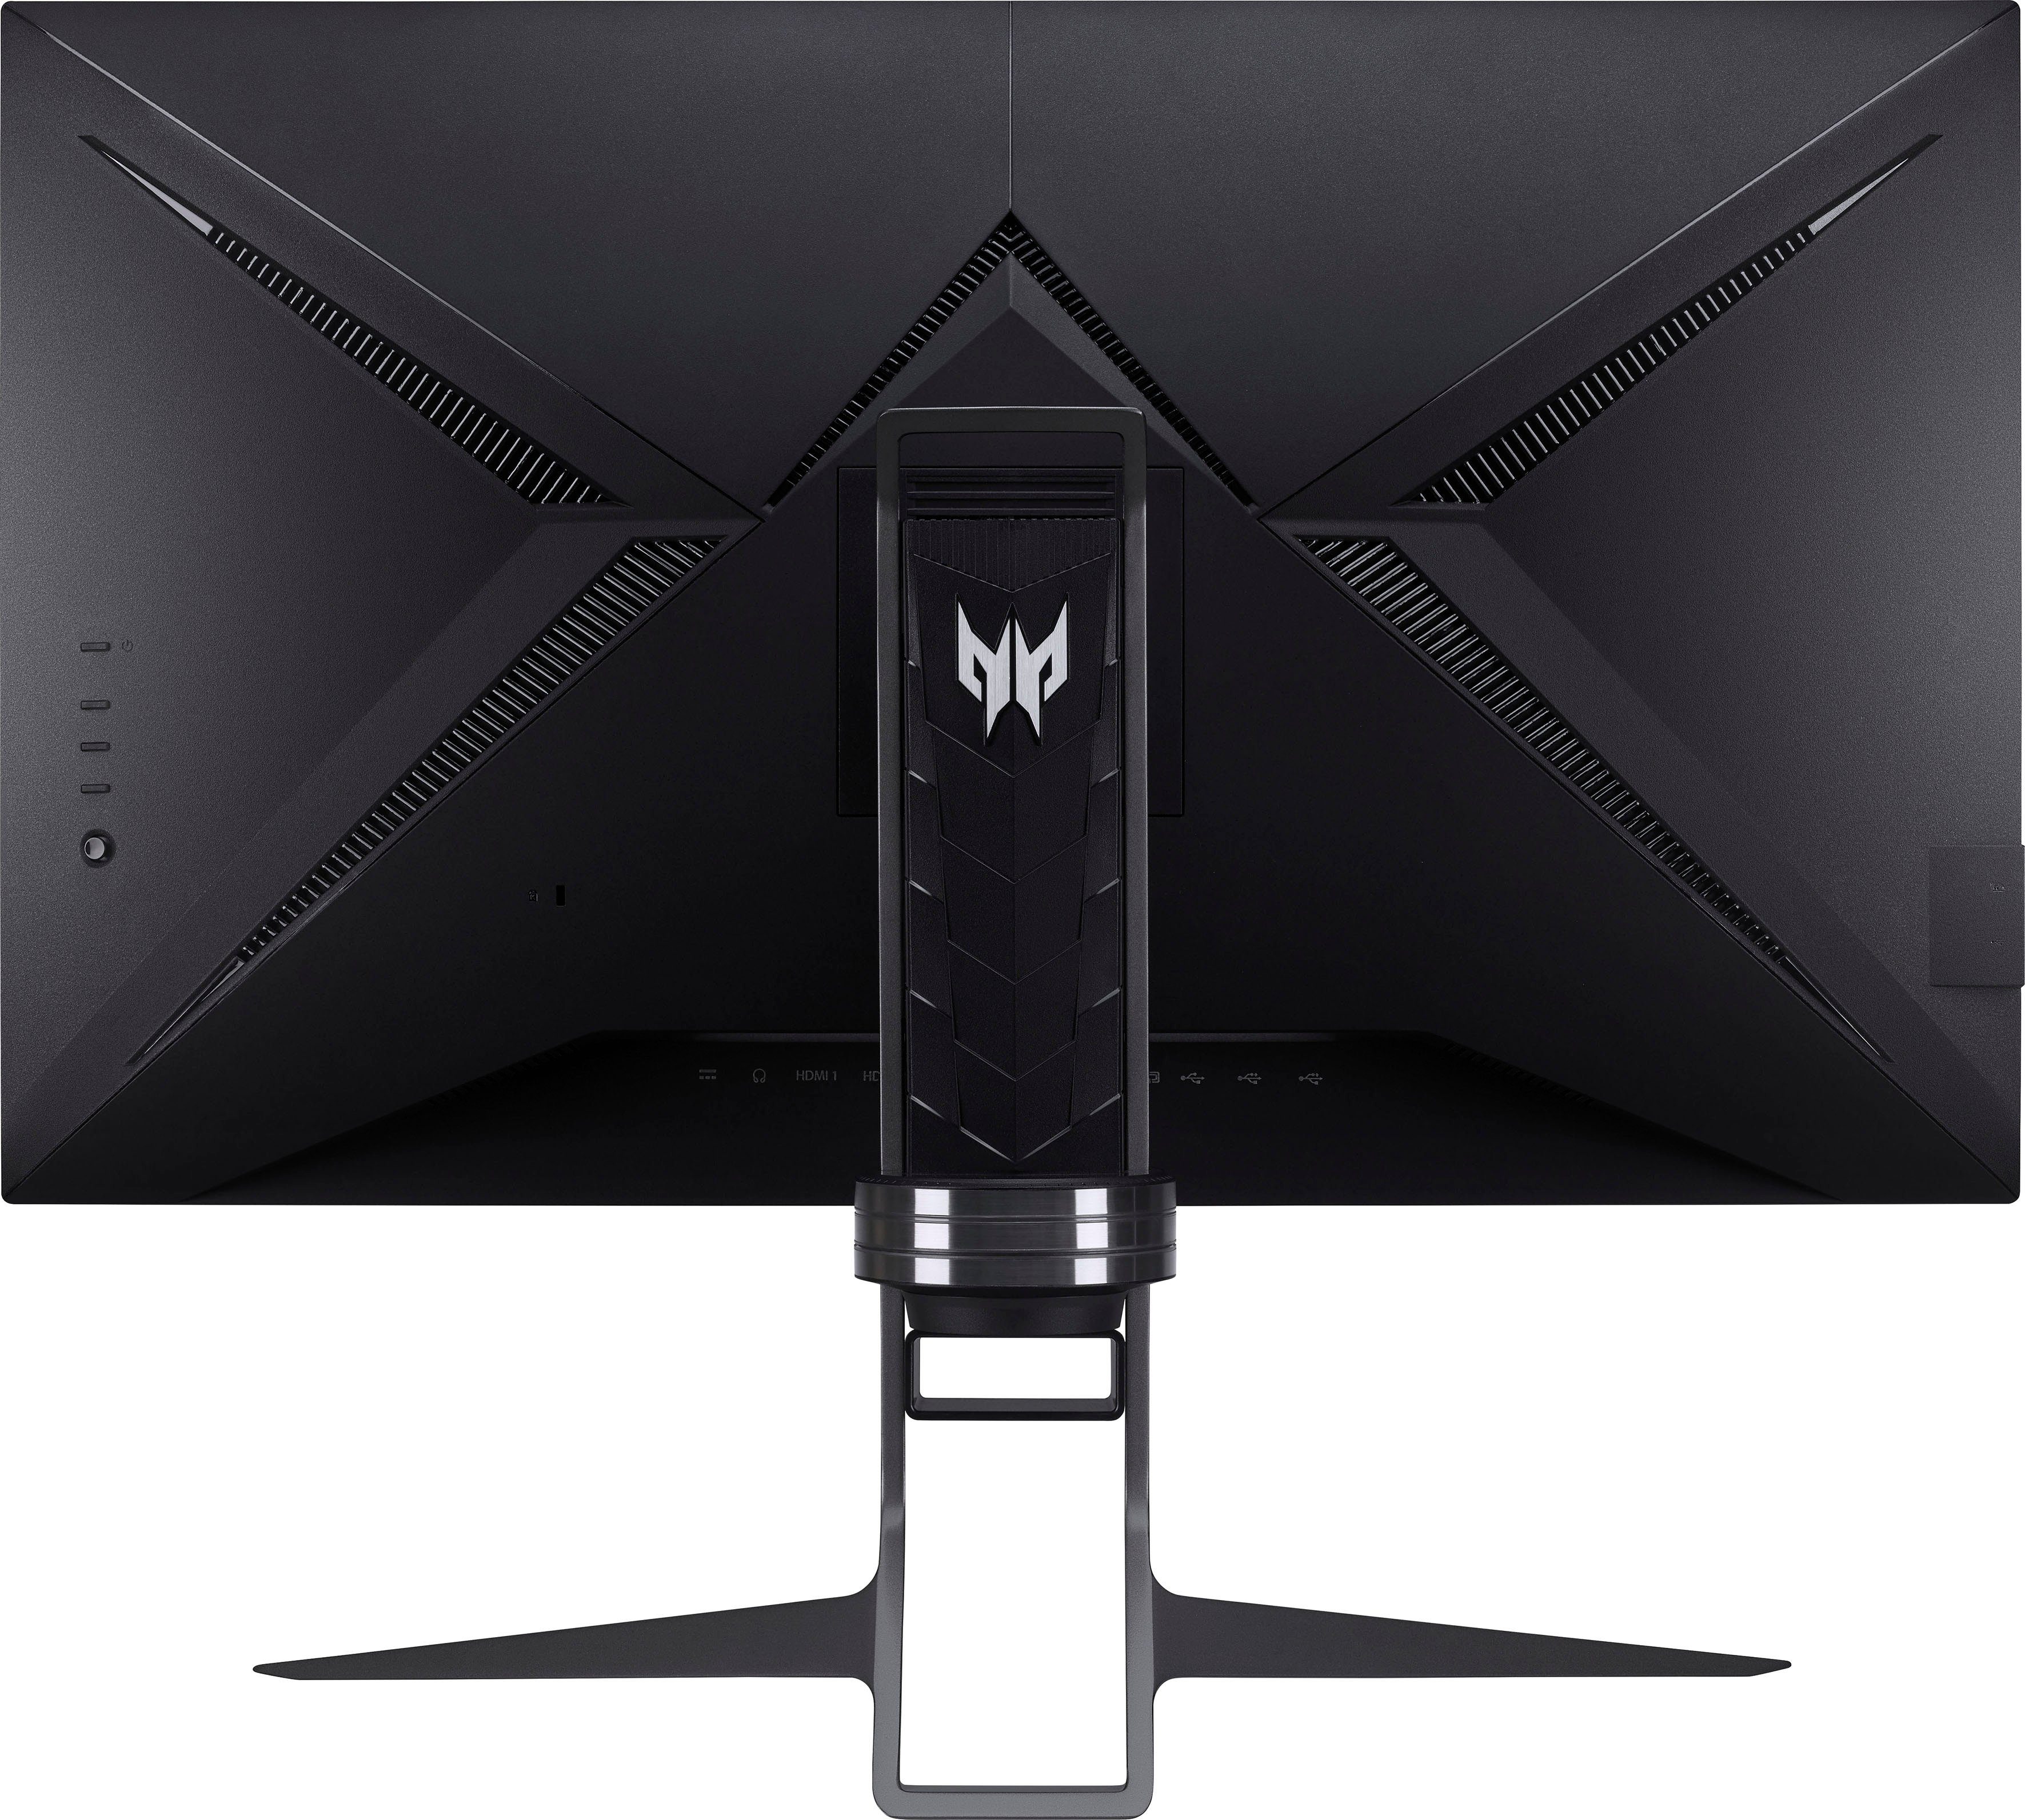 Acer Predator X32 FP Quantum Ultra HD, cm/32 Hz, 3840 4K LCD, 1000) (81 px, miniLED ", Dot 0,7 2160 Gaming-LED-Monitor ms 160 Reaktionszeit, Panel, x HDR